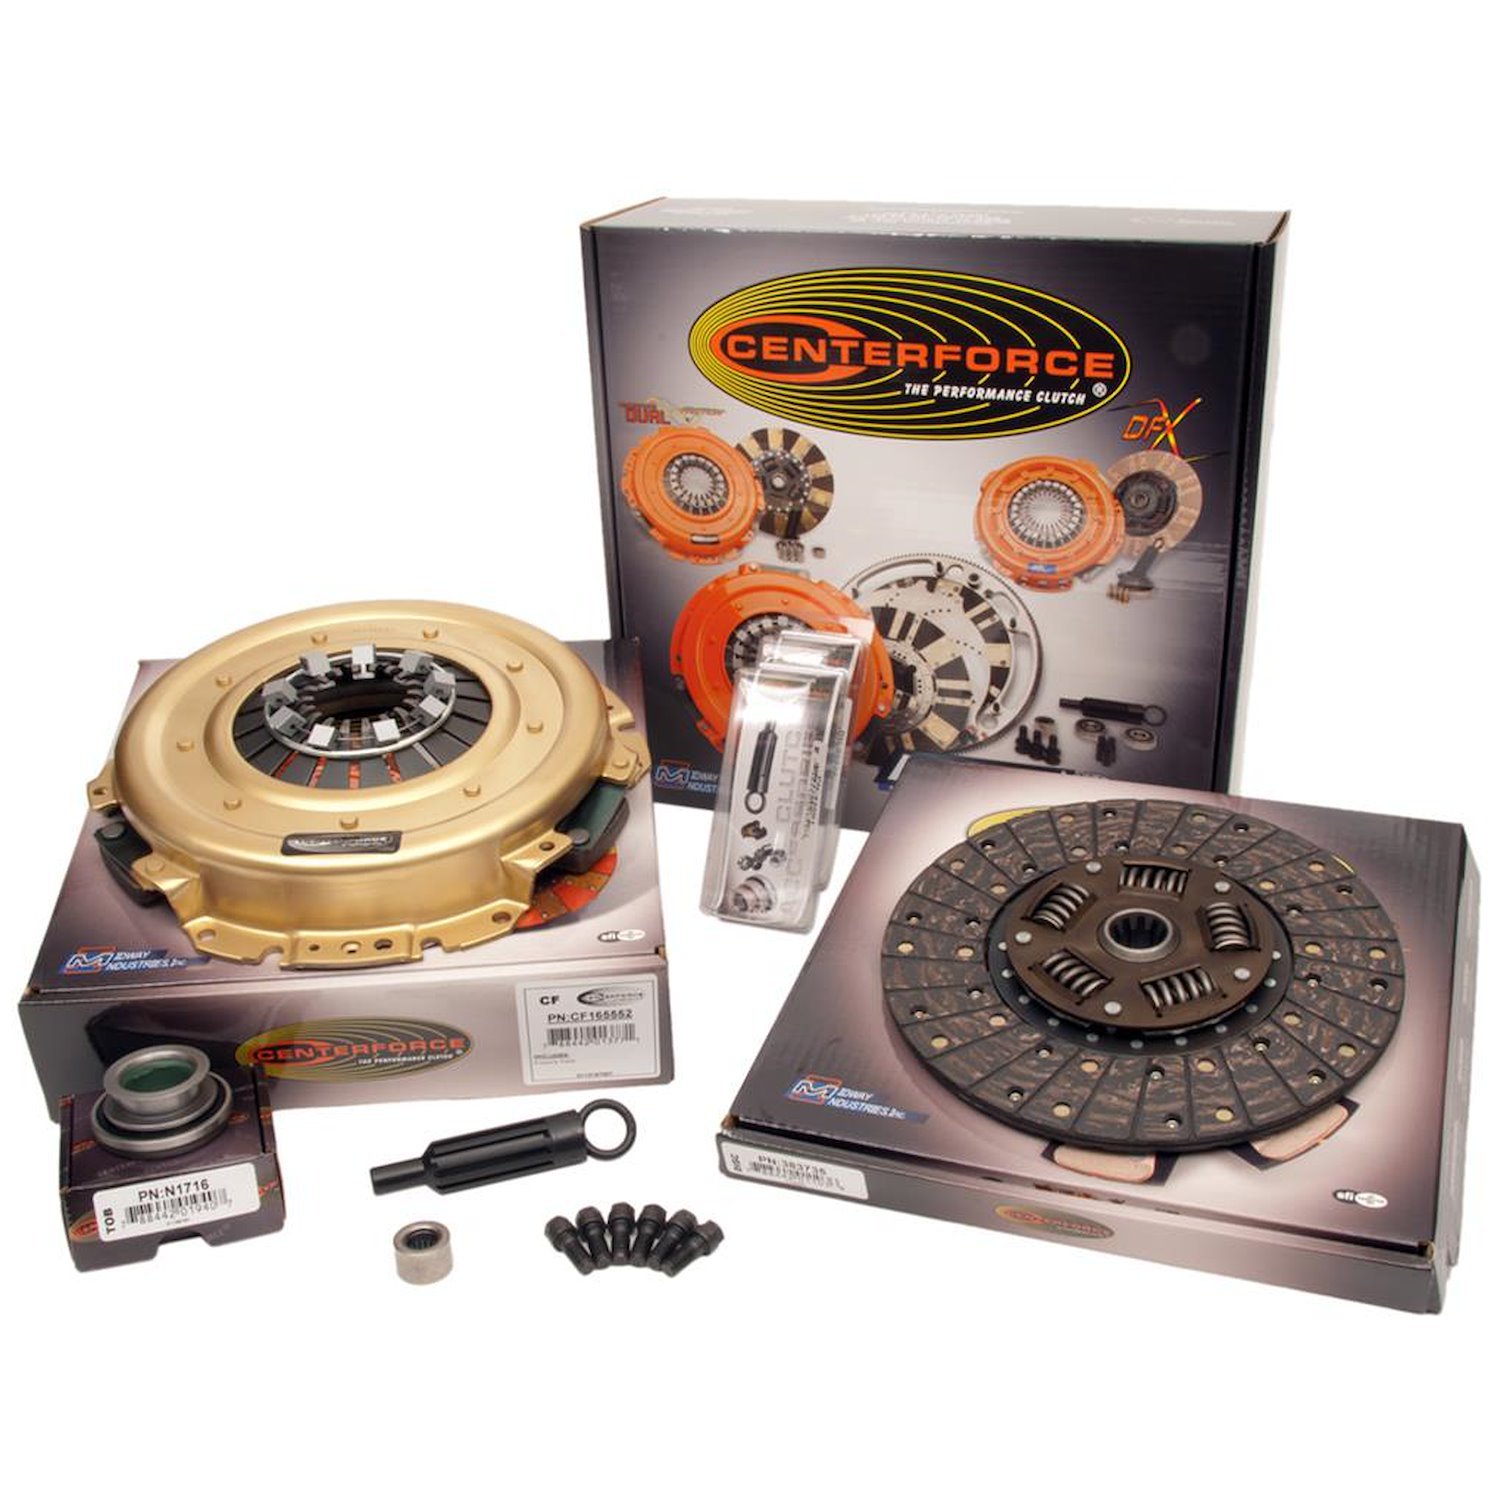 Centerforce I Clutch Kit Includes Pressure Plate, Clutch Disc, Throwout Bearing, Pilot Bearing, Bolts, Alignment Tool